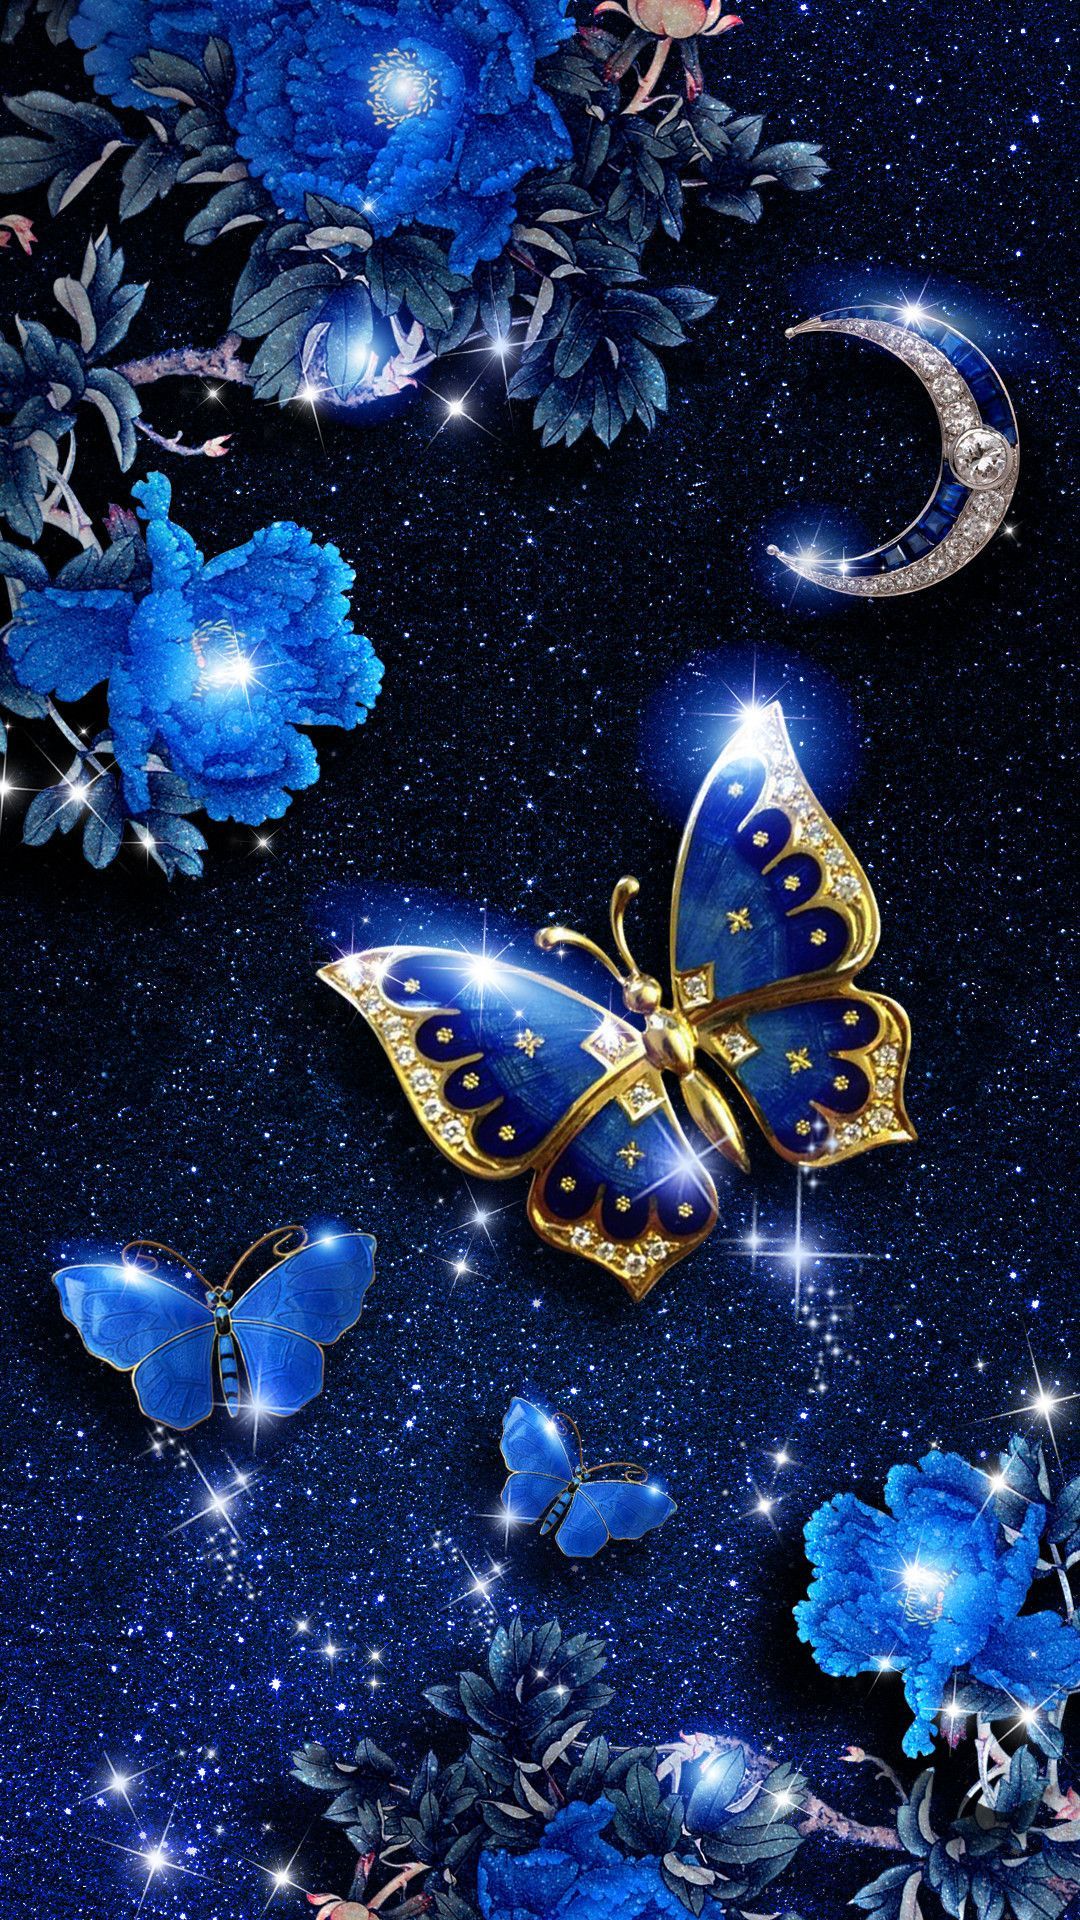 new Android Wallpaper Blue 1080x1920 for HD. Blue butterfly wallpaper, Butterfly wallpaper background, Android wallpaper blue